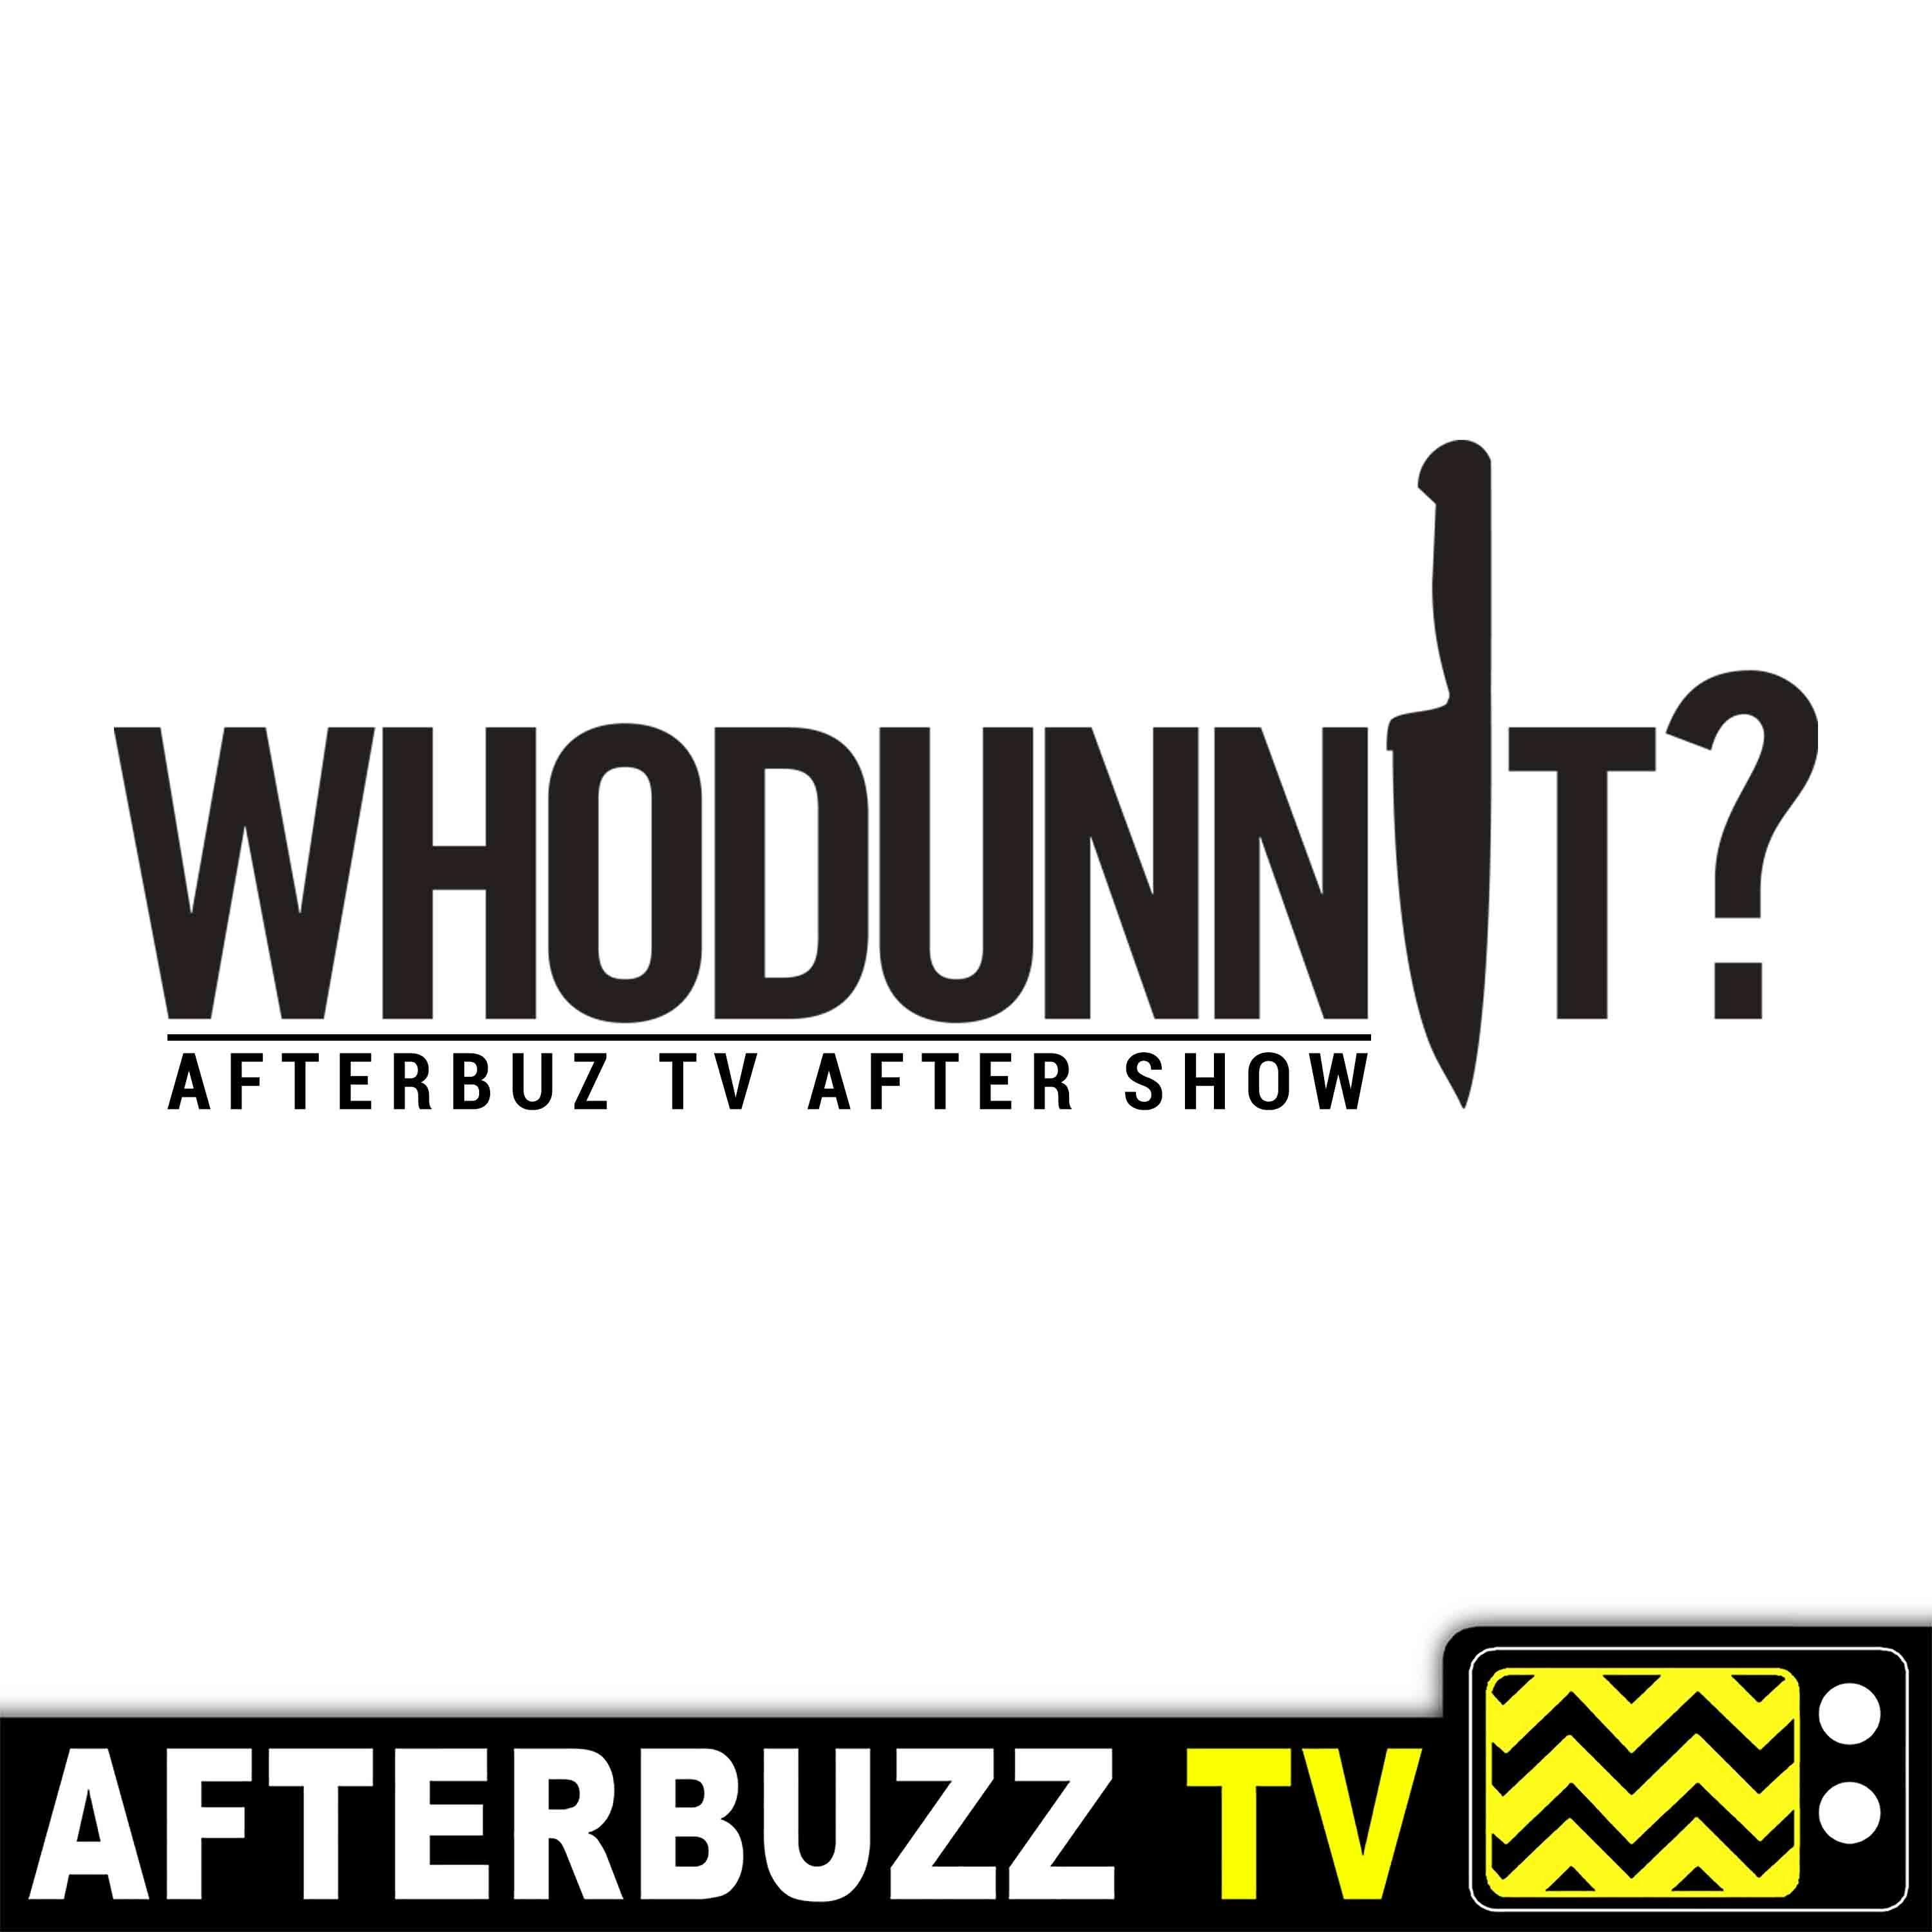 Whodunnit? S:1 | All the World’s a Stage E:6 | AfterBuzz TV AfterShow